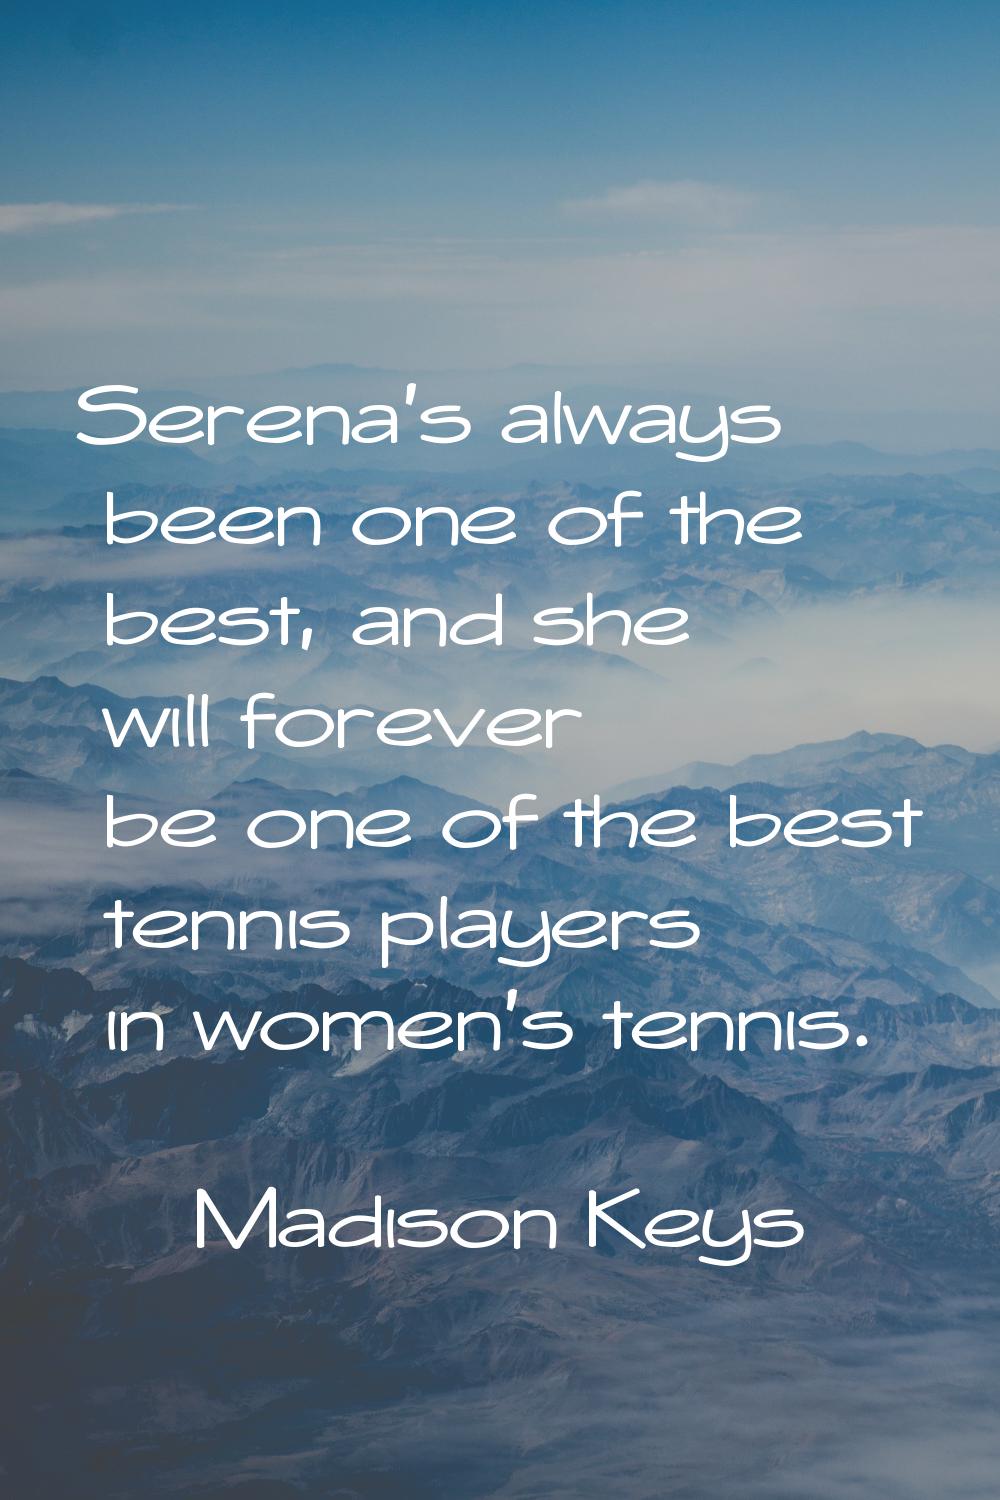 Serena's always been one of the best, and she will forever be one of the best tennis players in wom